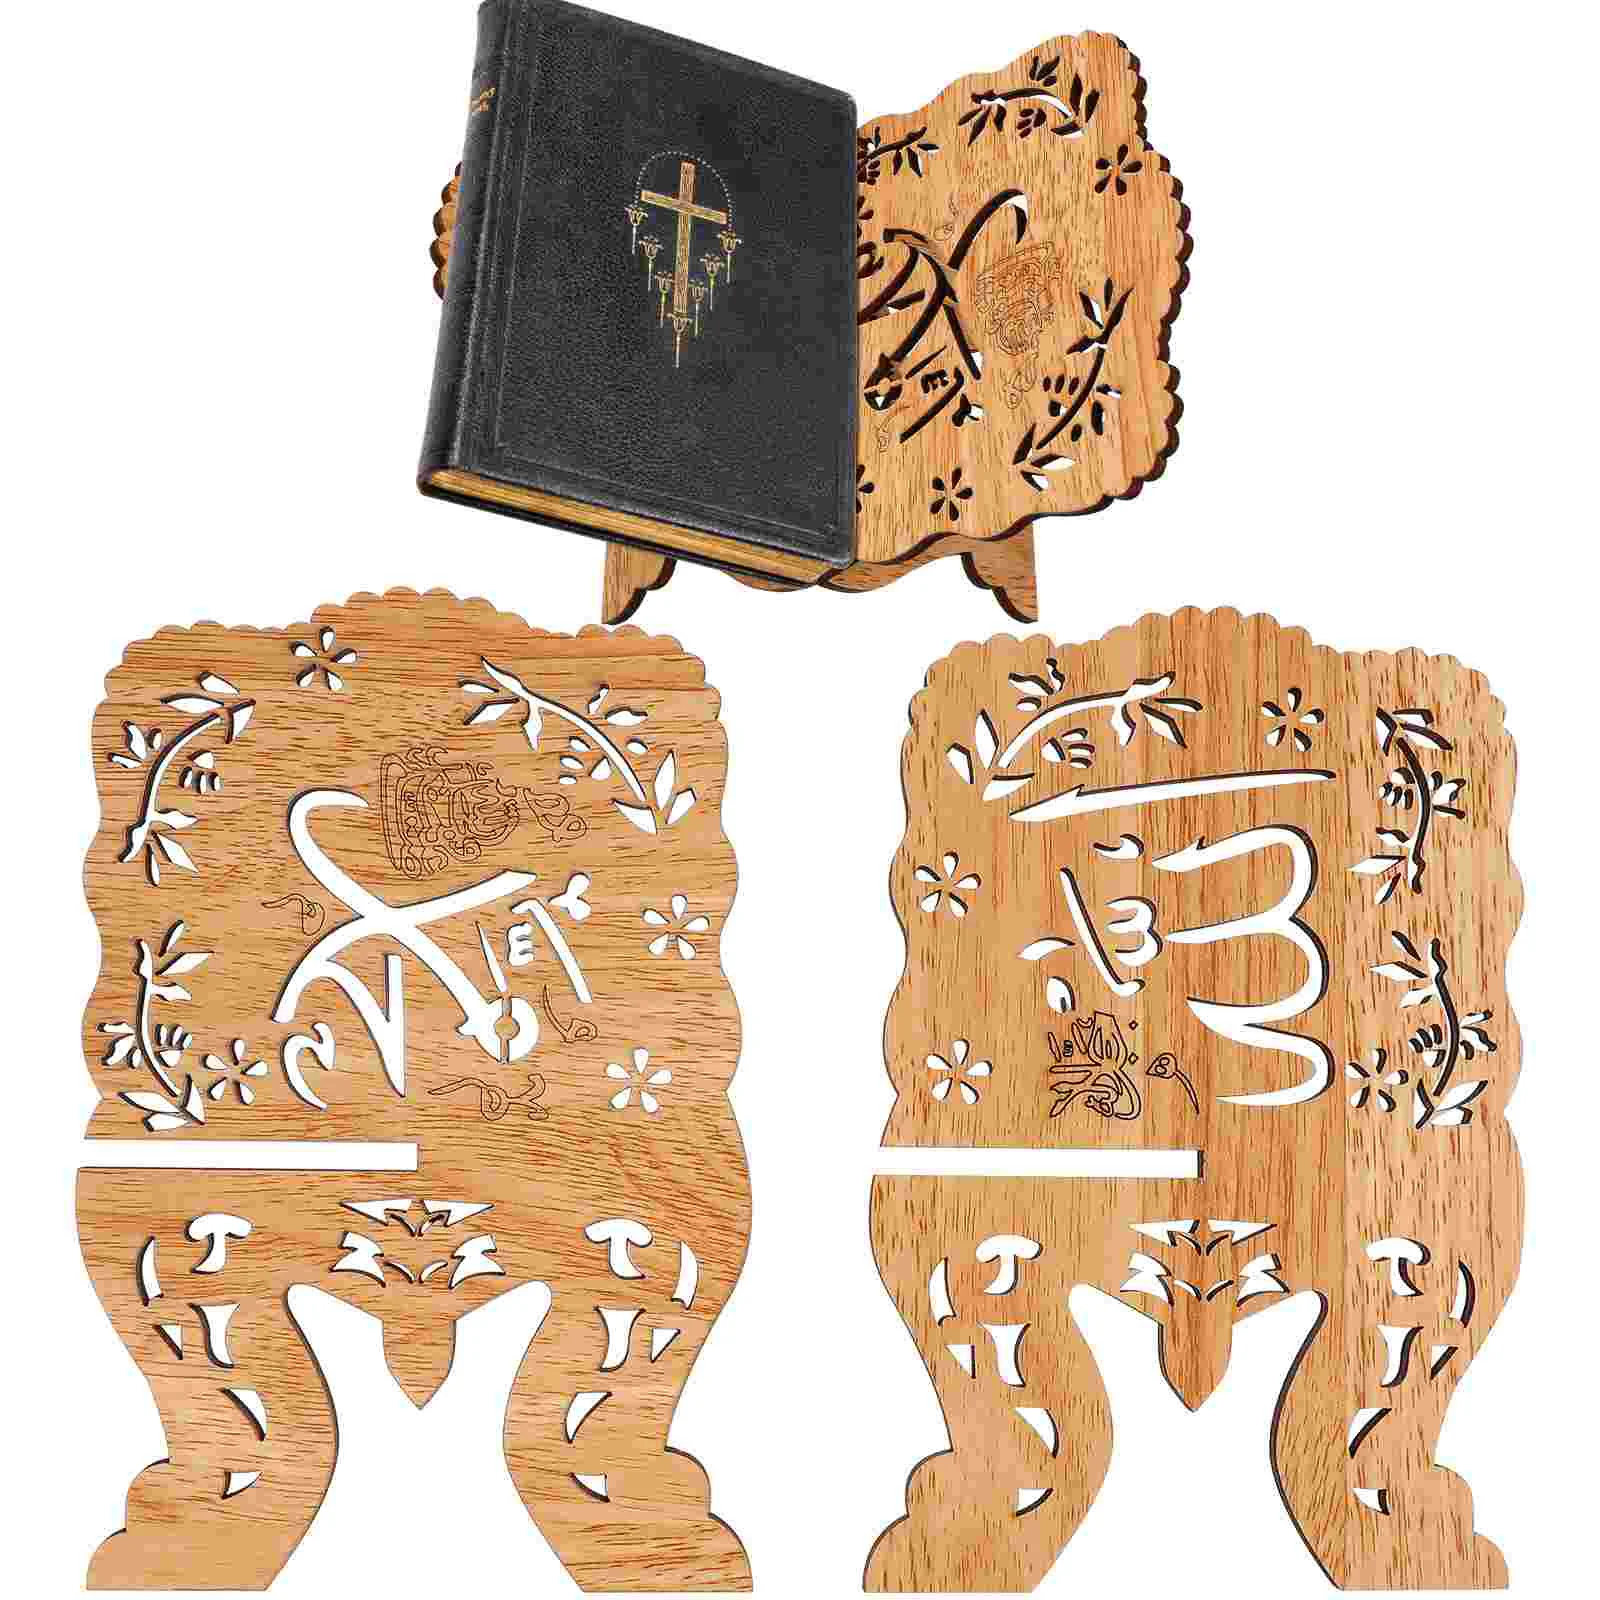 

Wooden Book Stand Quran Stand Islamic Foldable Rehal Bible Display Holder Quran Holder for Displaying and Reading Eid Bookshelf